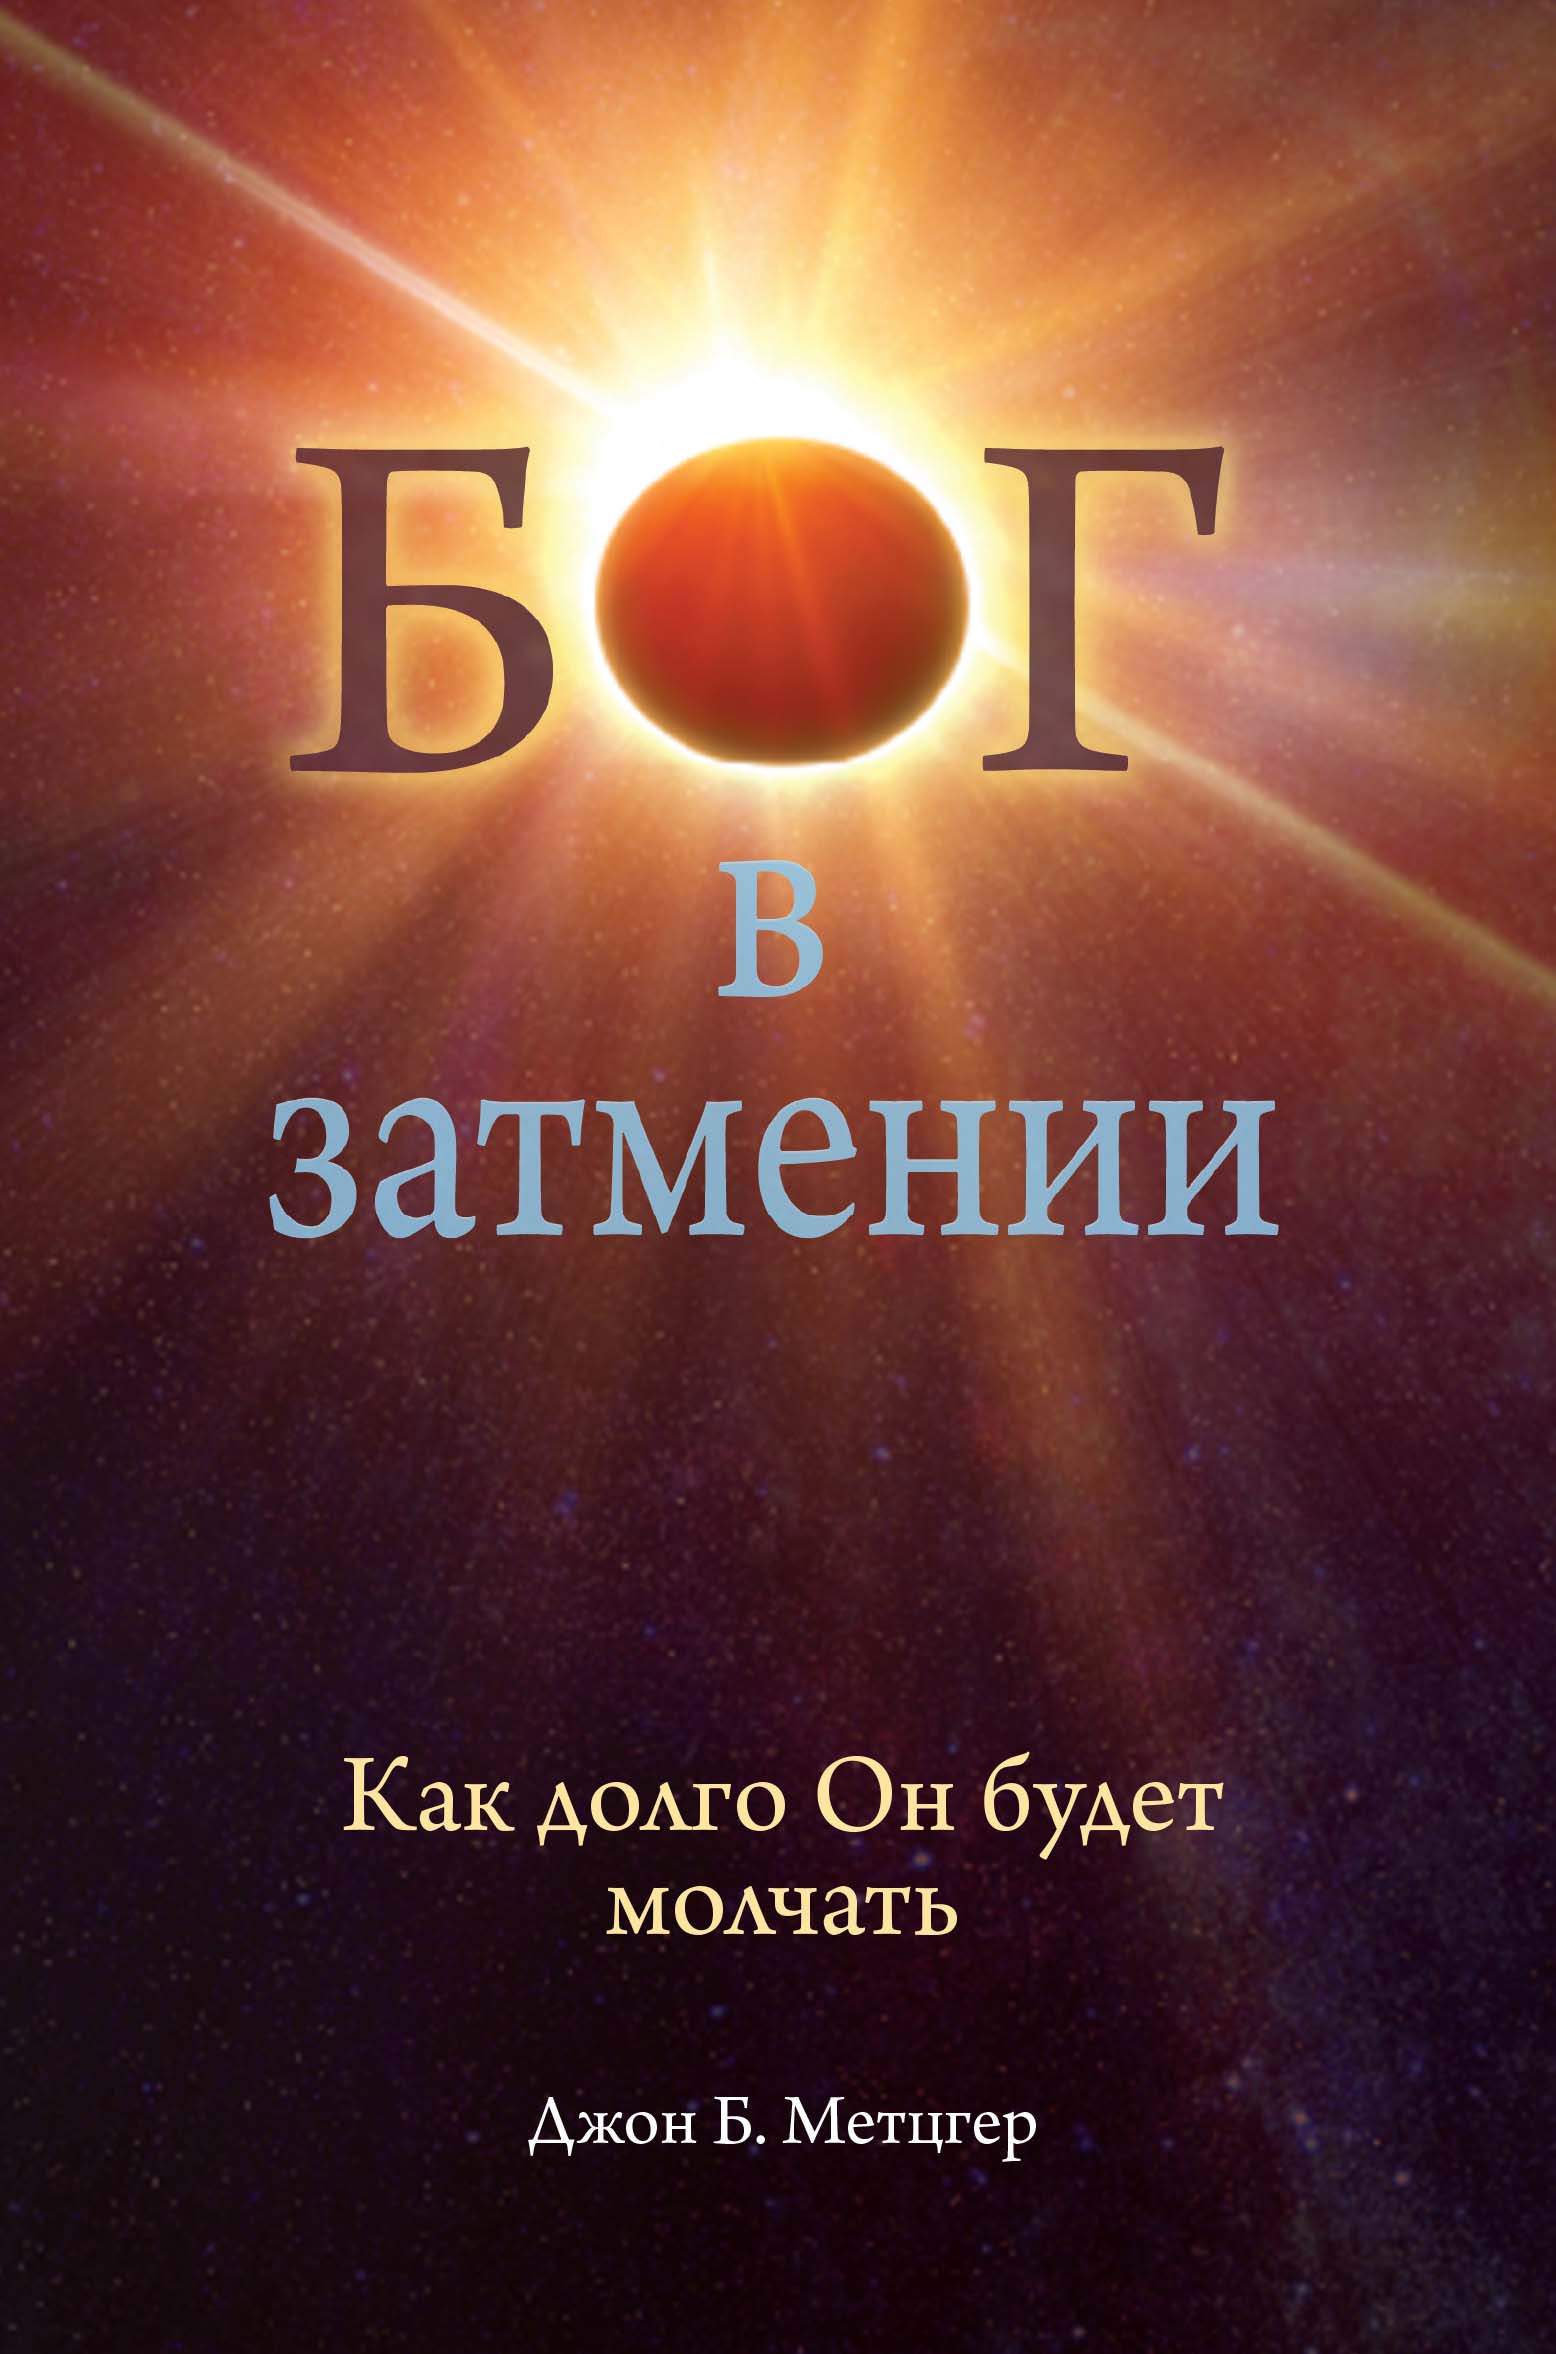 God in Eclipse (Russian)